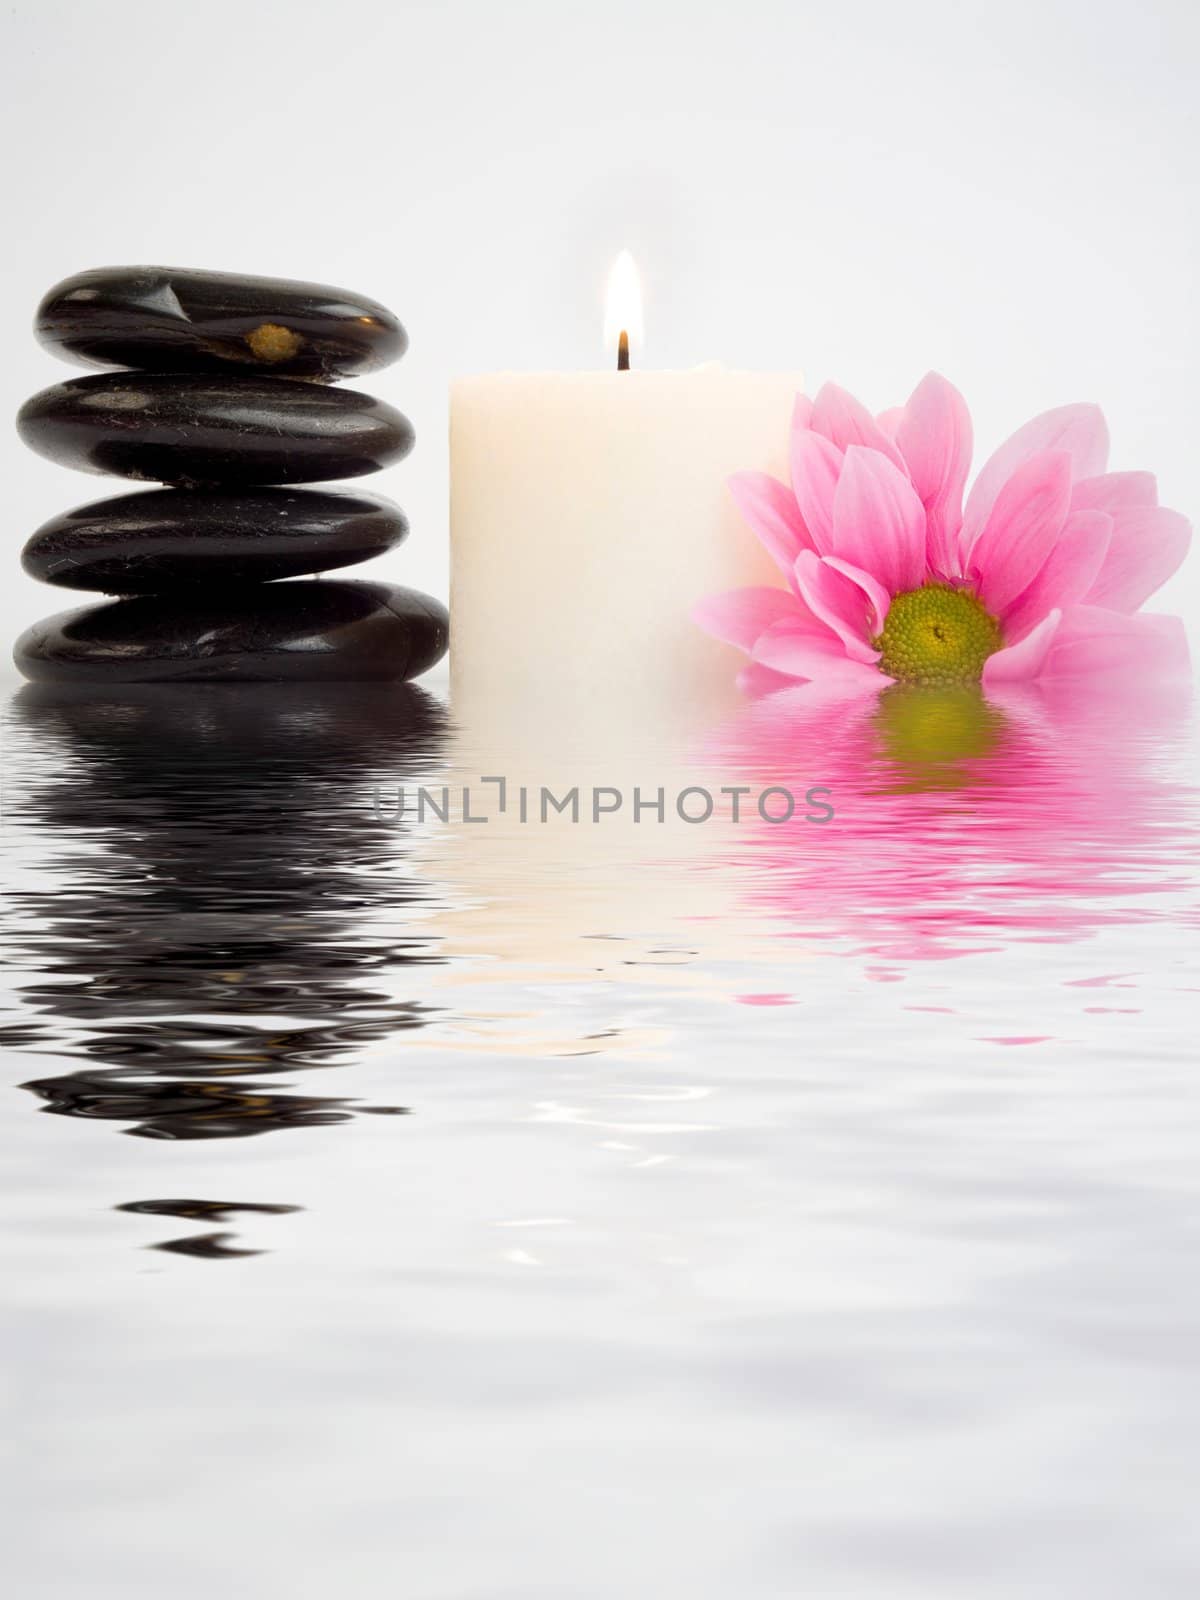 An image of pink flower and candle in water